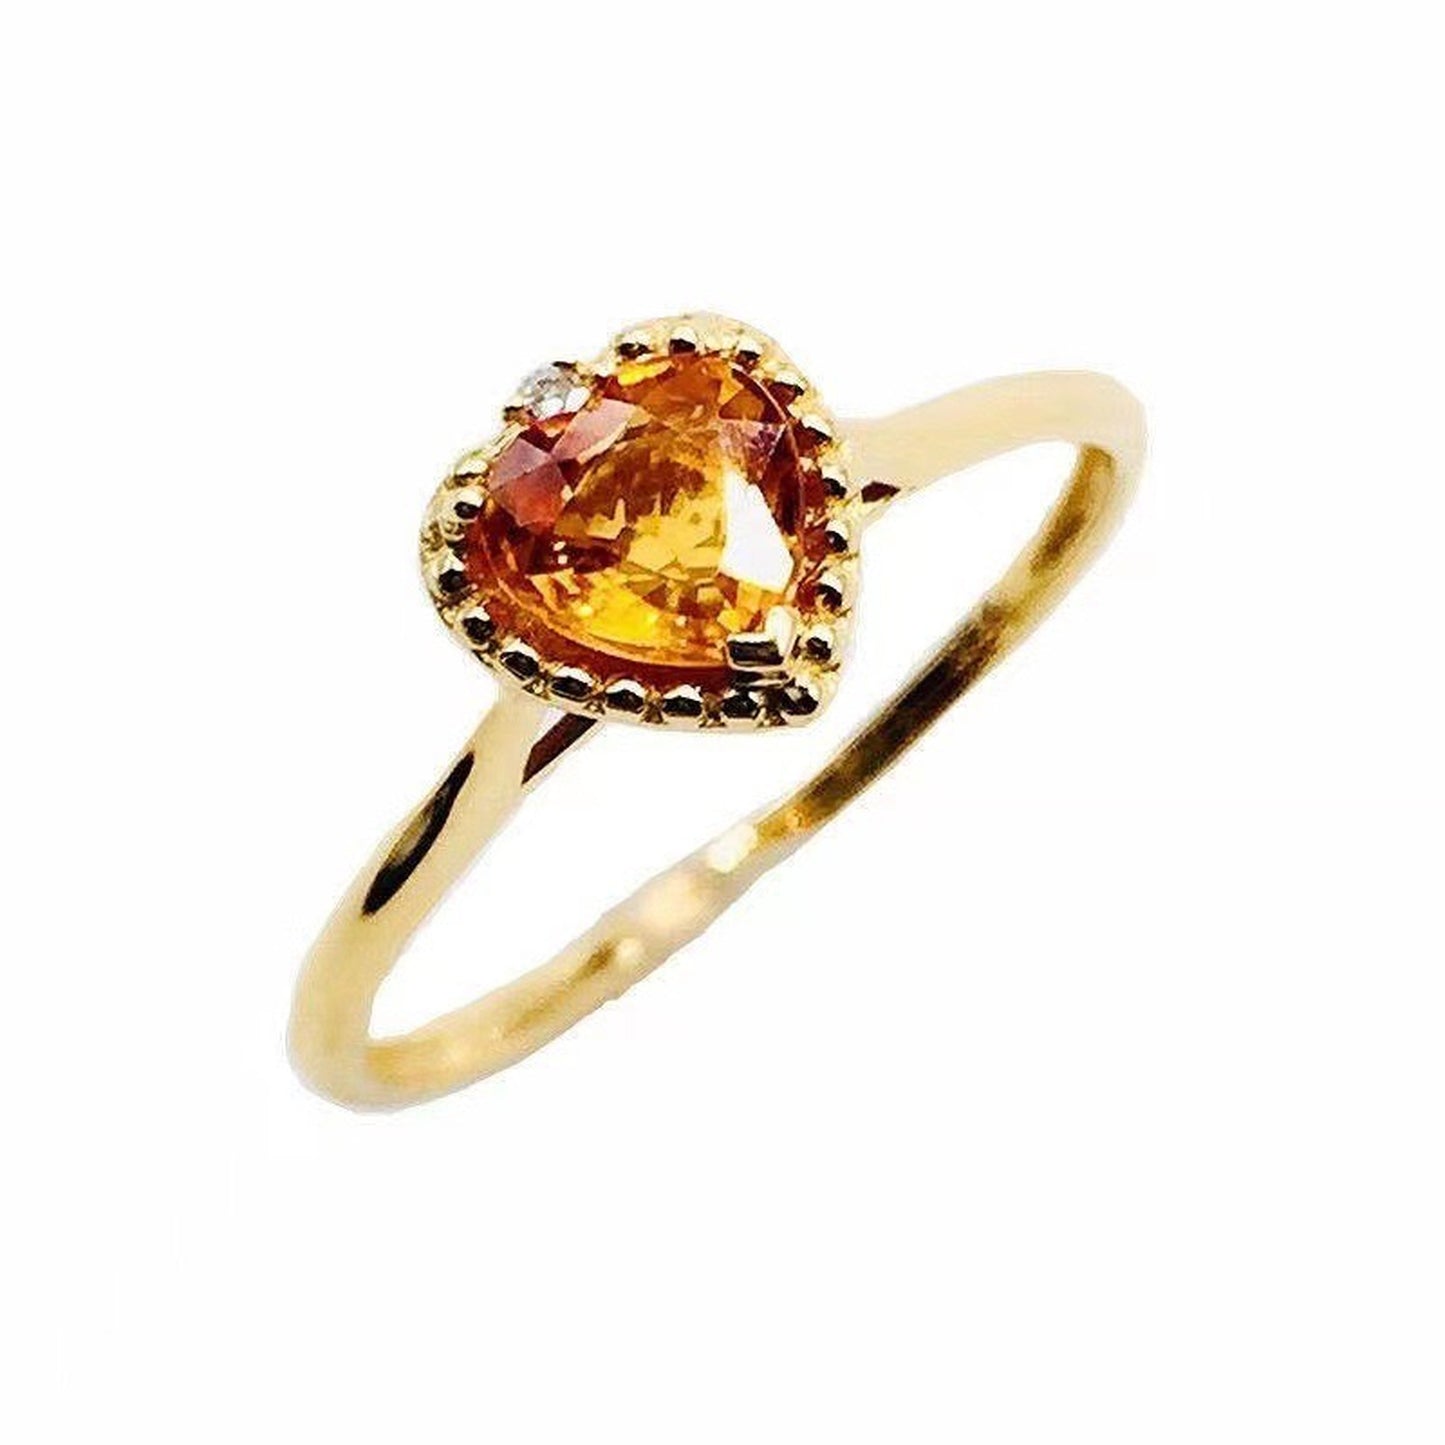 Yellow citrine crystal ring, Yellow topaz ring, Heart shaped ring, Open ring, Scottish topaz ring, Antique vintage rings, Birthday gift idea